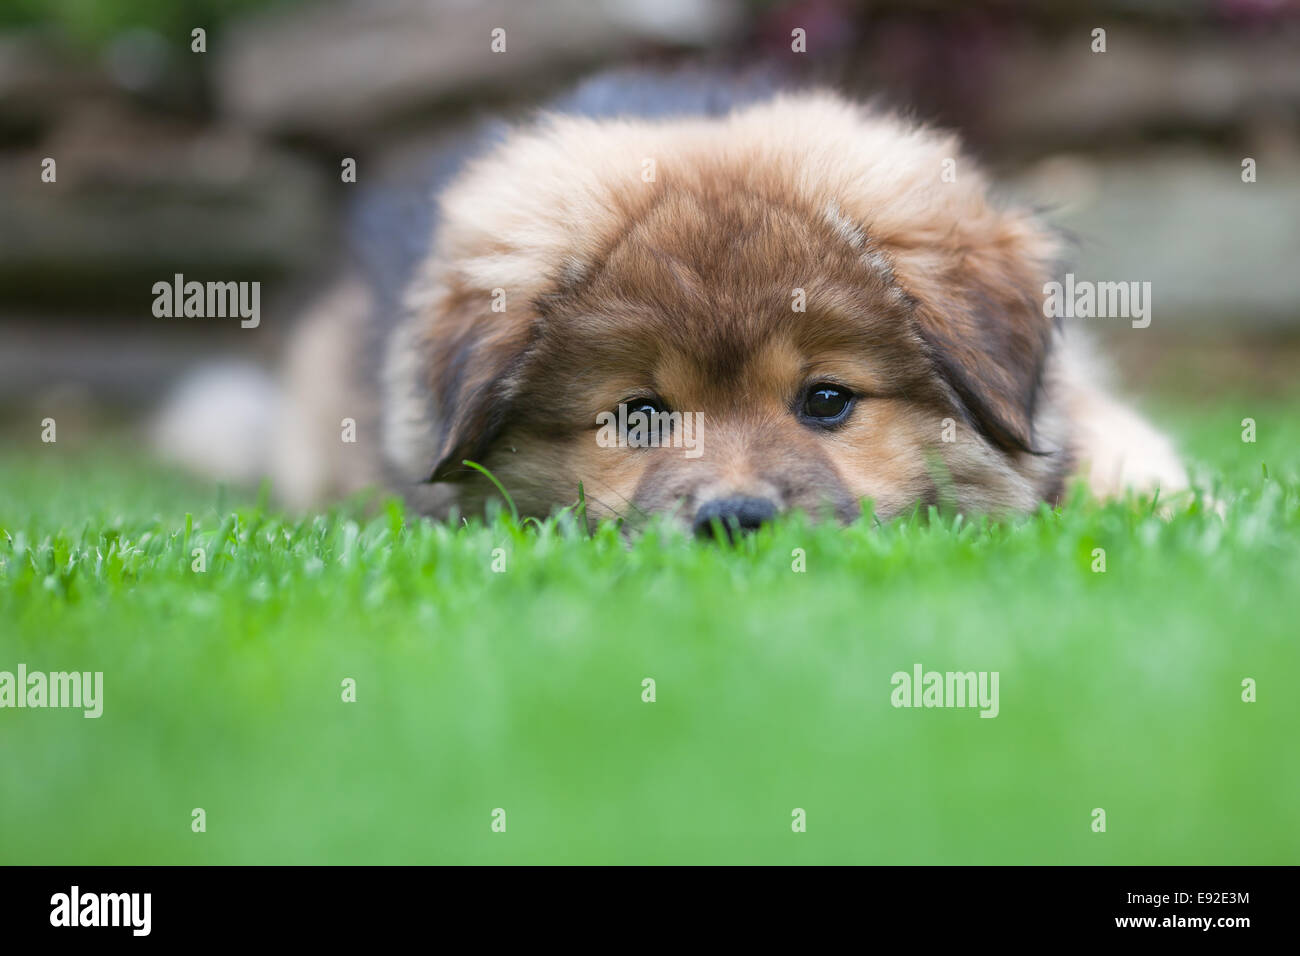 Elo puppy is lying in the grass Stock Photo